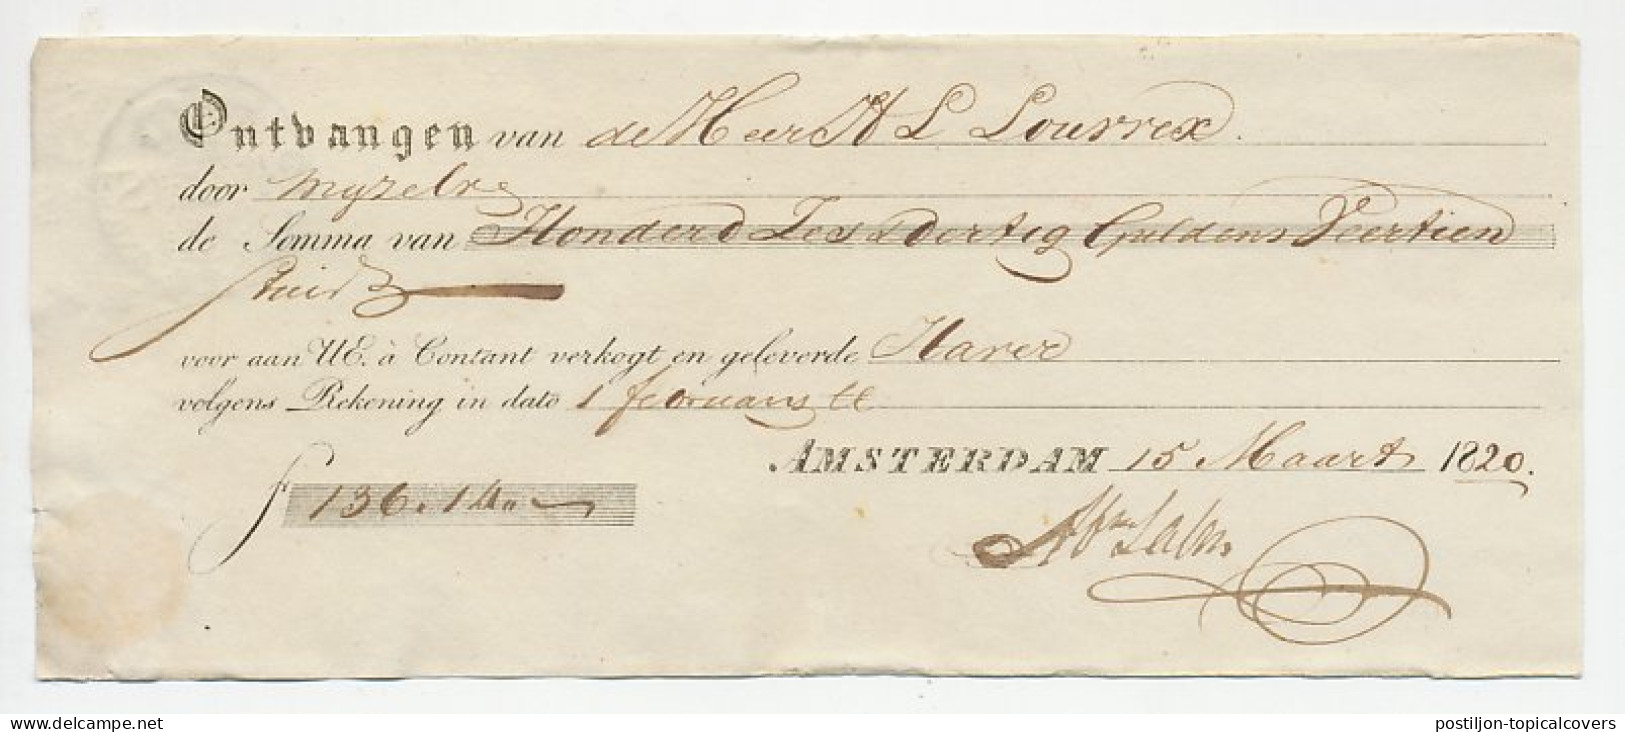 Fiscaal / Revenue - 2 1/2 ST. NOORD HOLLAND - 1820 - Revenue Stamps